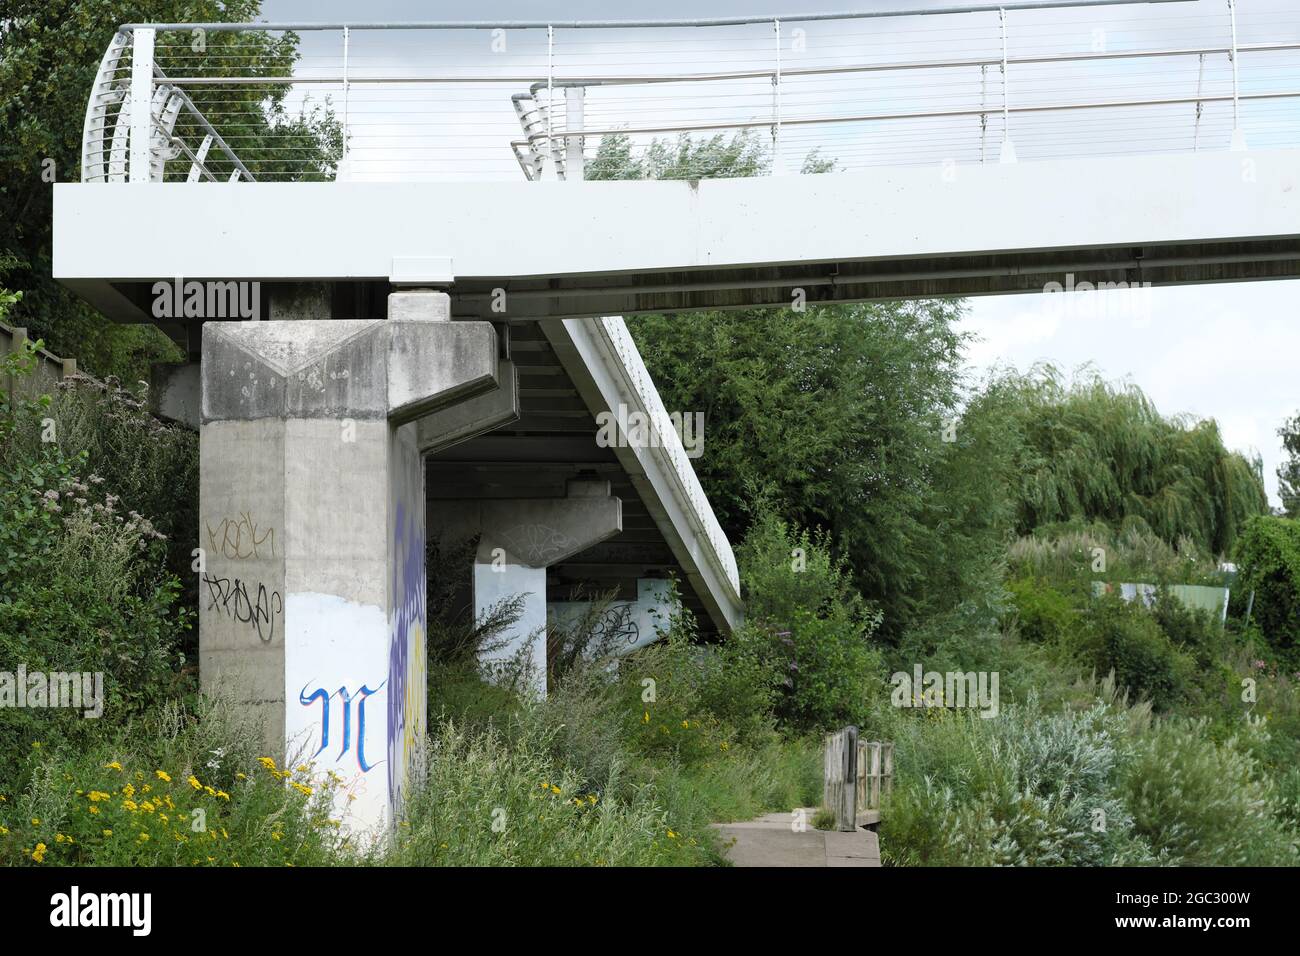 Modern pedestrian footbridge design made of concrete and steel in Hereford UK 2021 Stock Photo